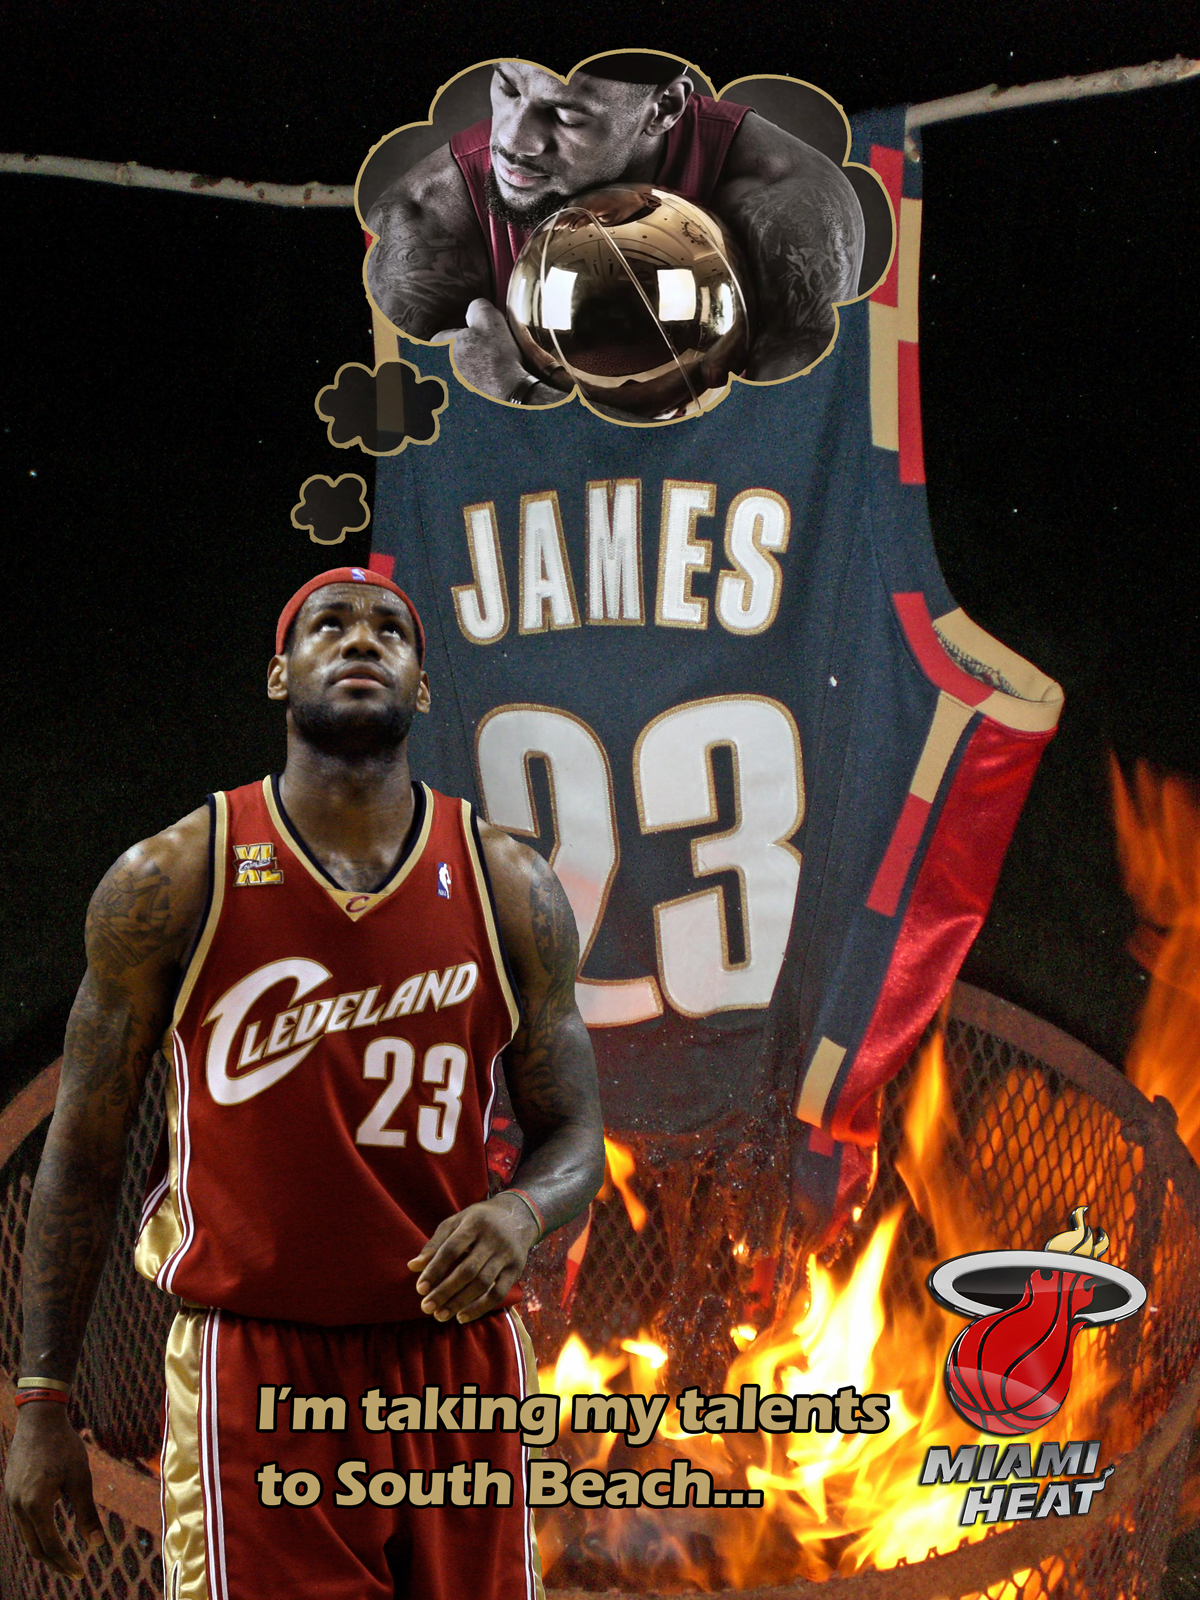 A tribute to LeBron James' DECISION to leave Cleveland to join the Miami Heat in pursuit of an NBA championship!